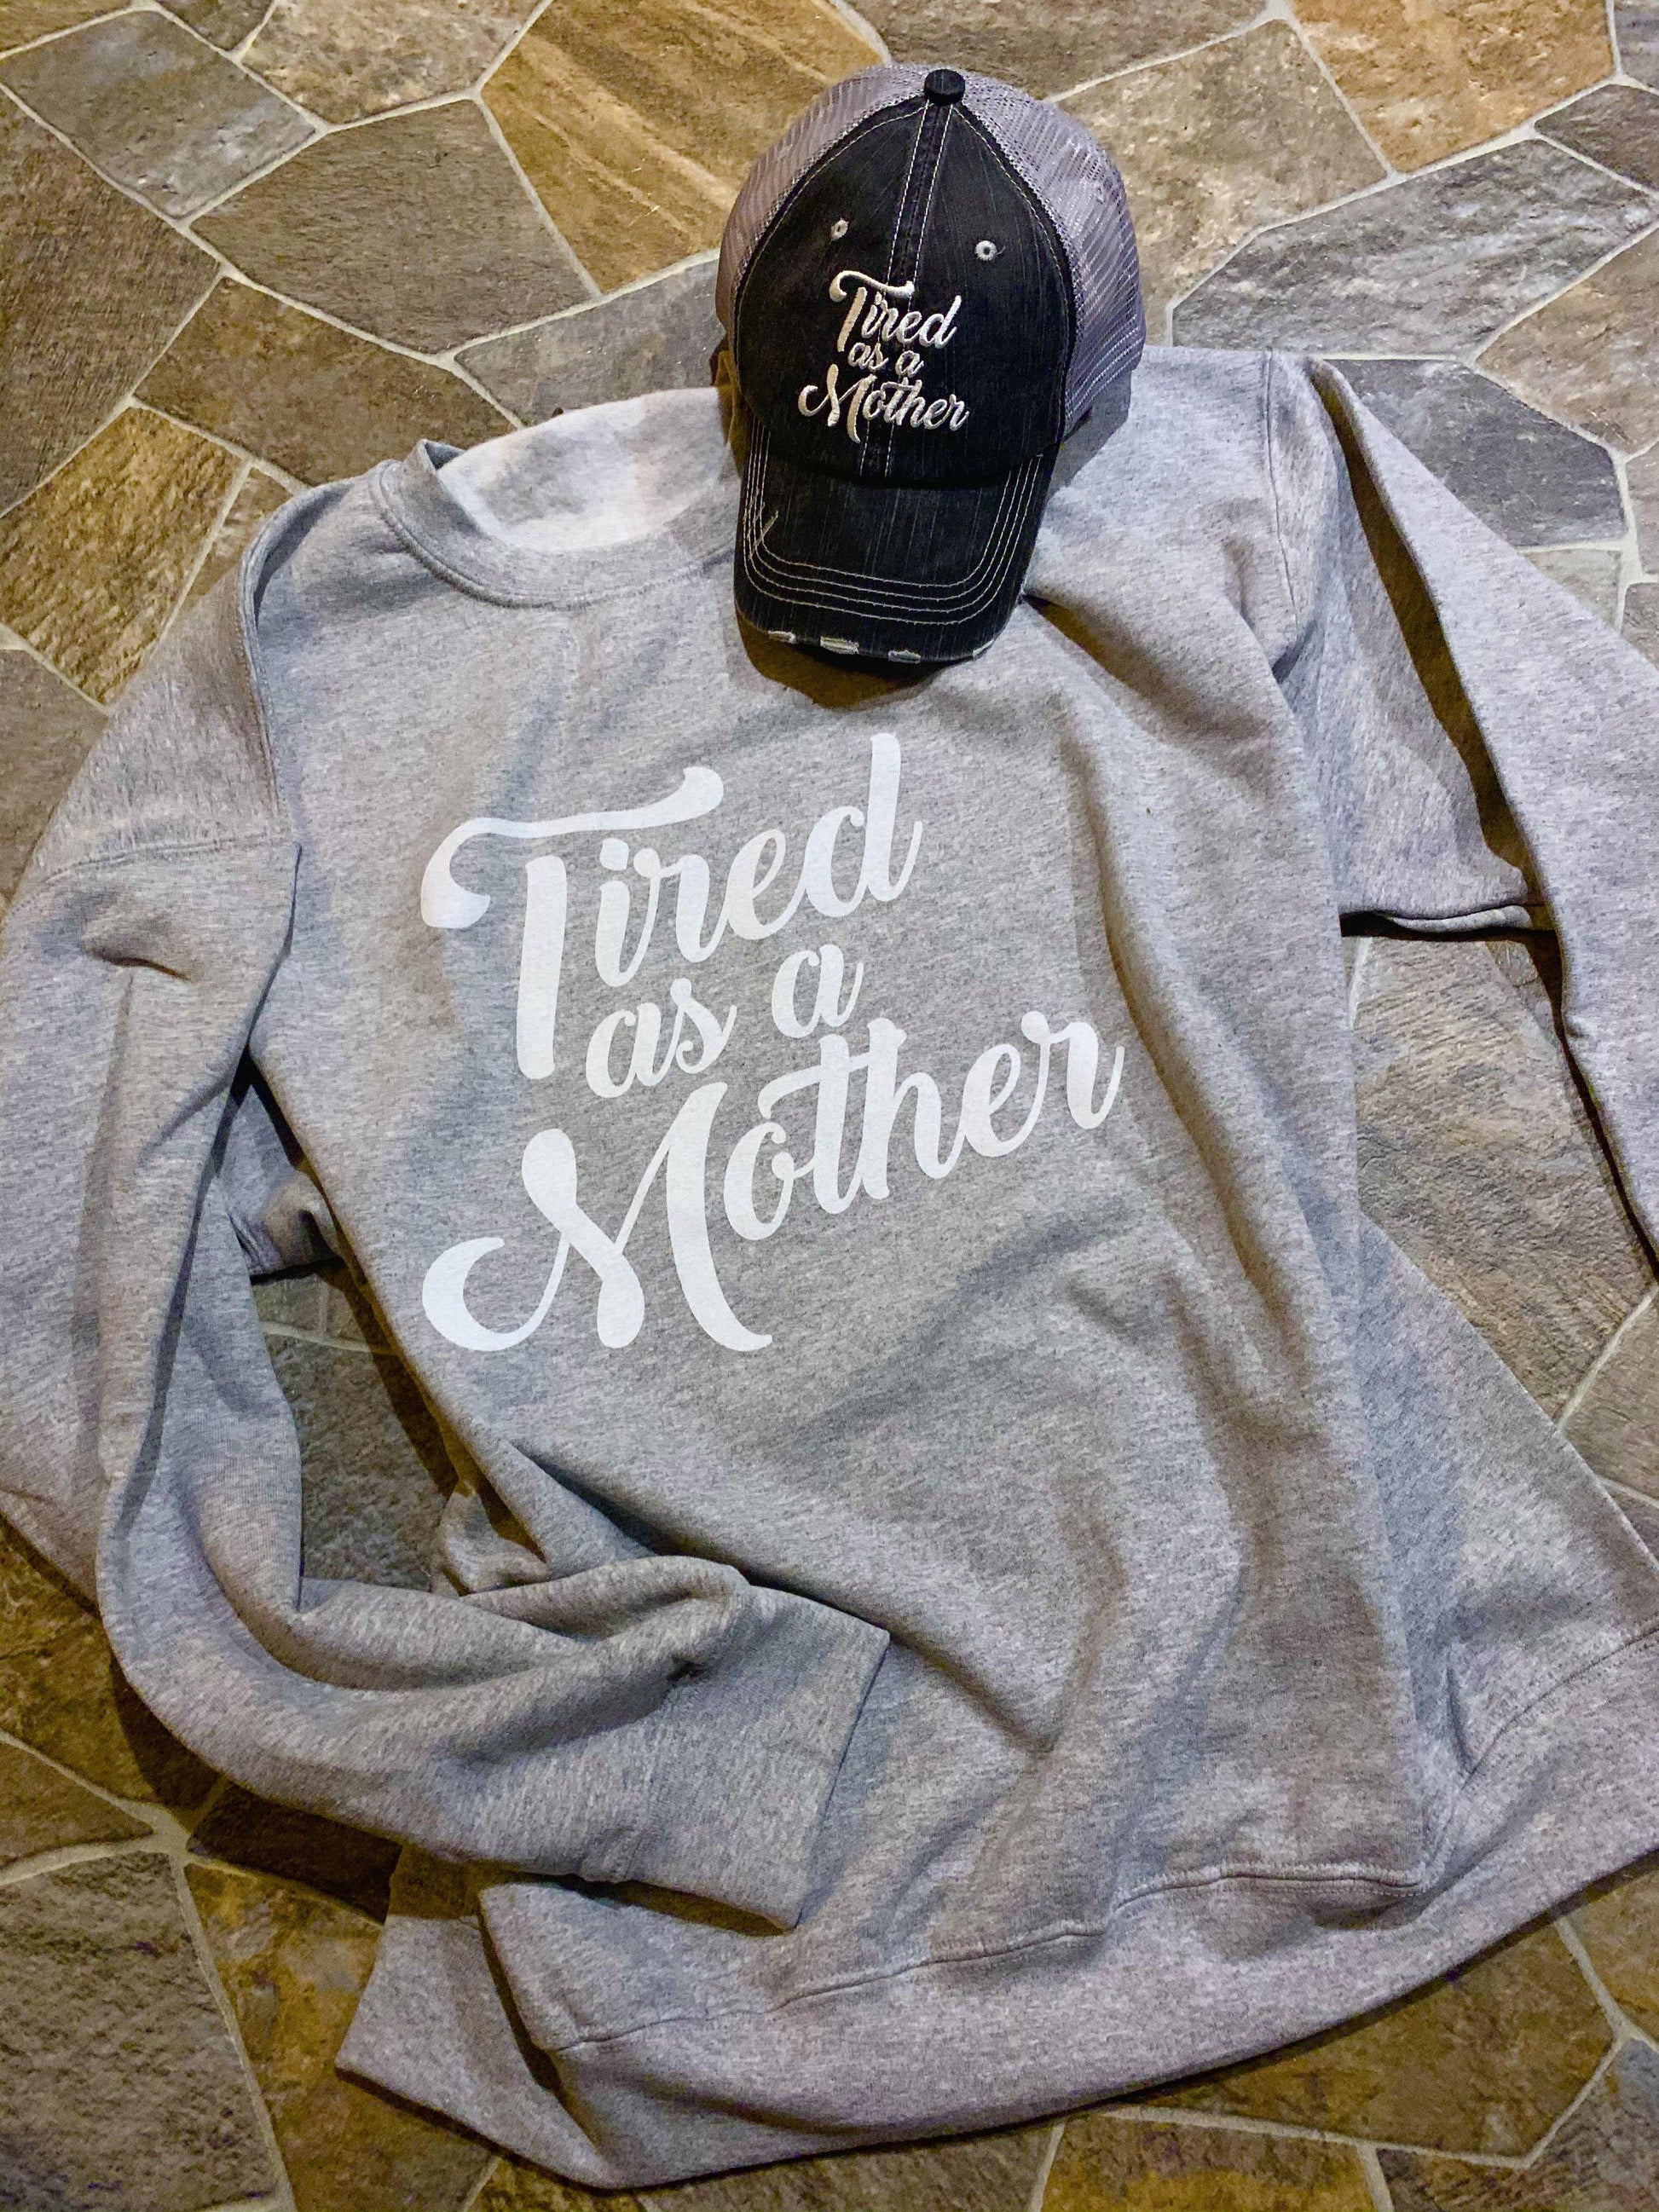 Tired as a mother MOM sweatshirts and hats Blue or gray S - XL - Stacy's Pink Martini Boutique